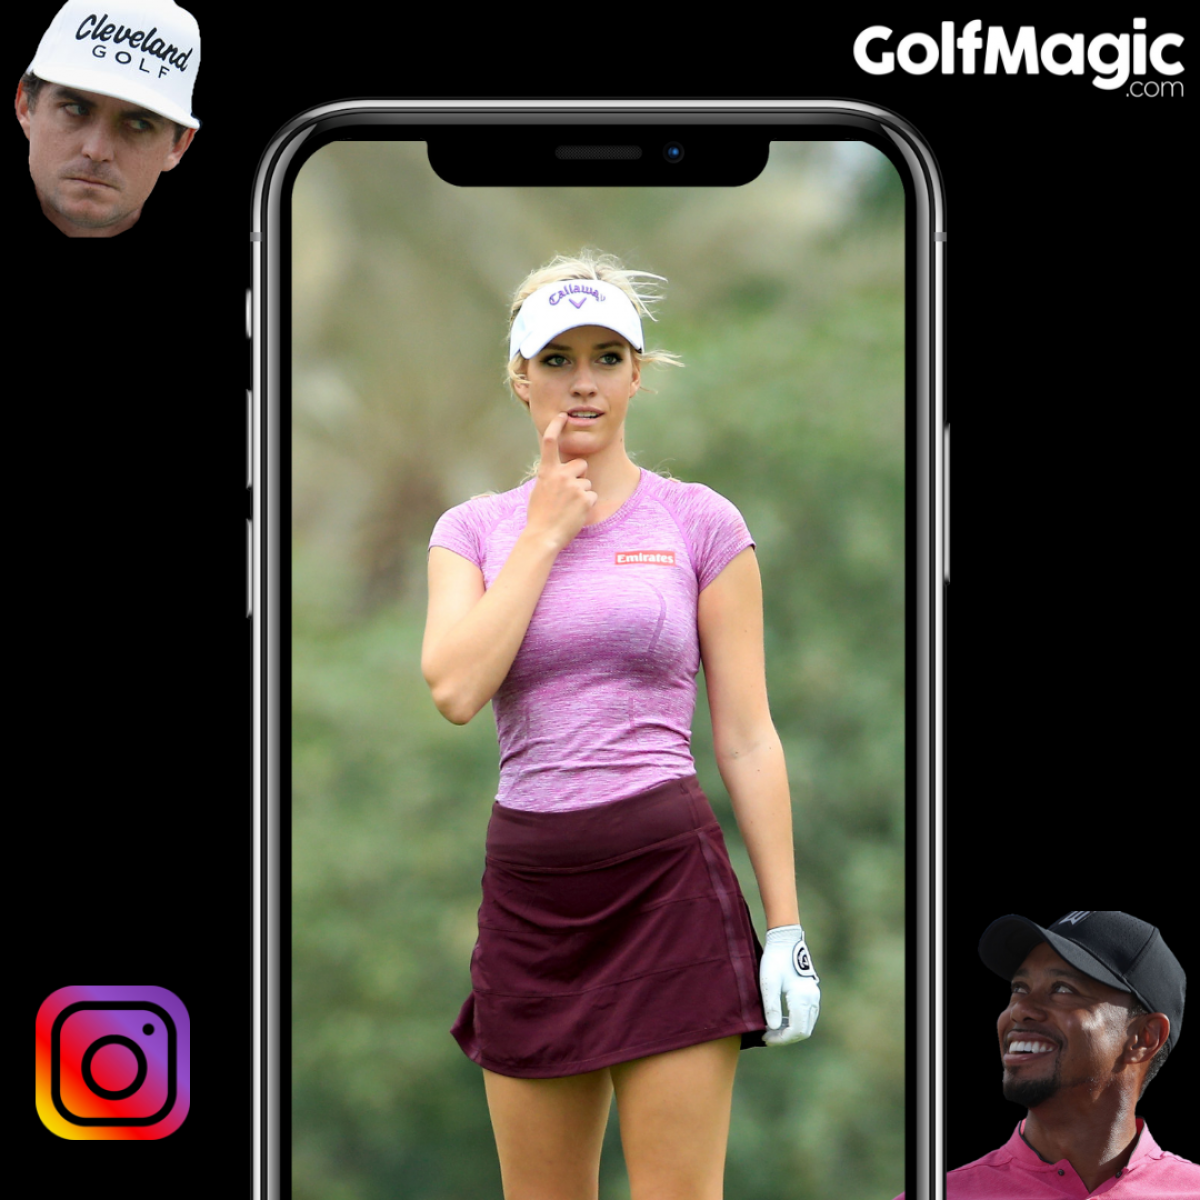 Funny Golf Porn - Top 5 golf Instagram accounts you should be following right now... |  GolfMagic